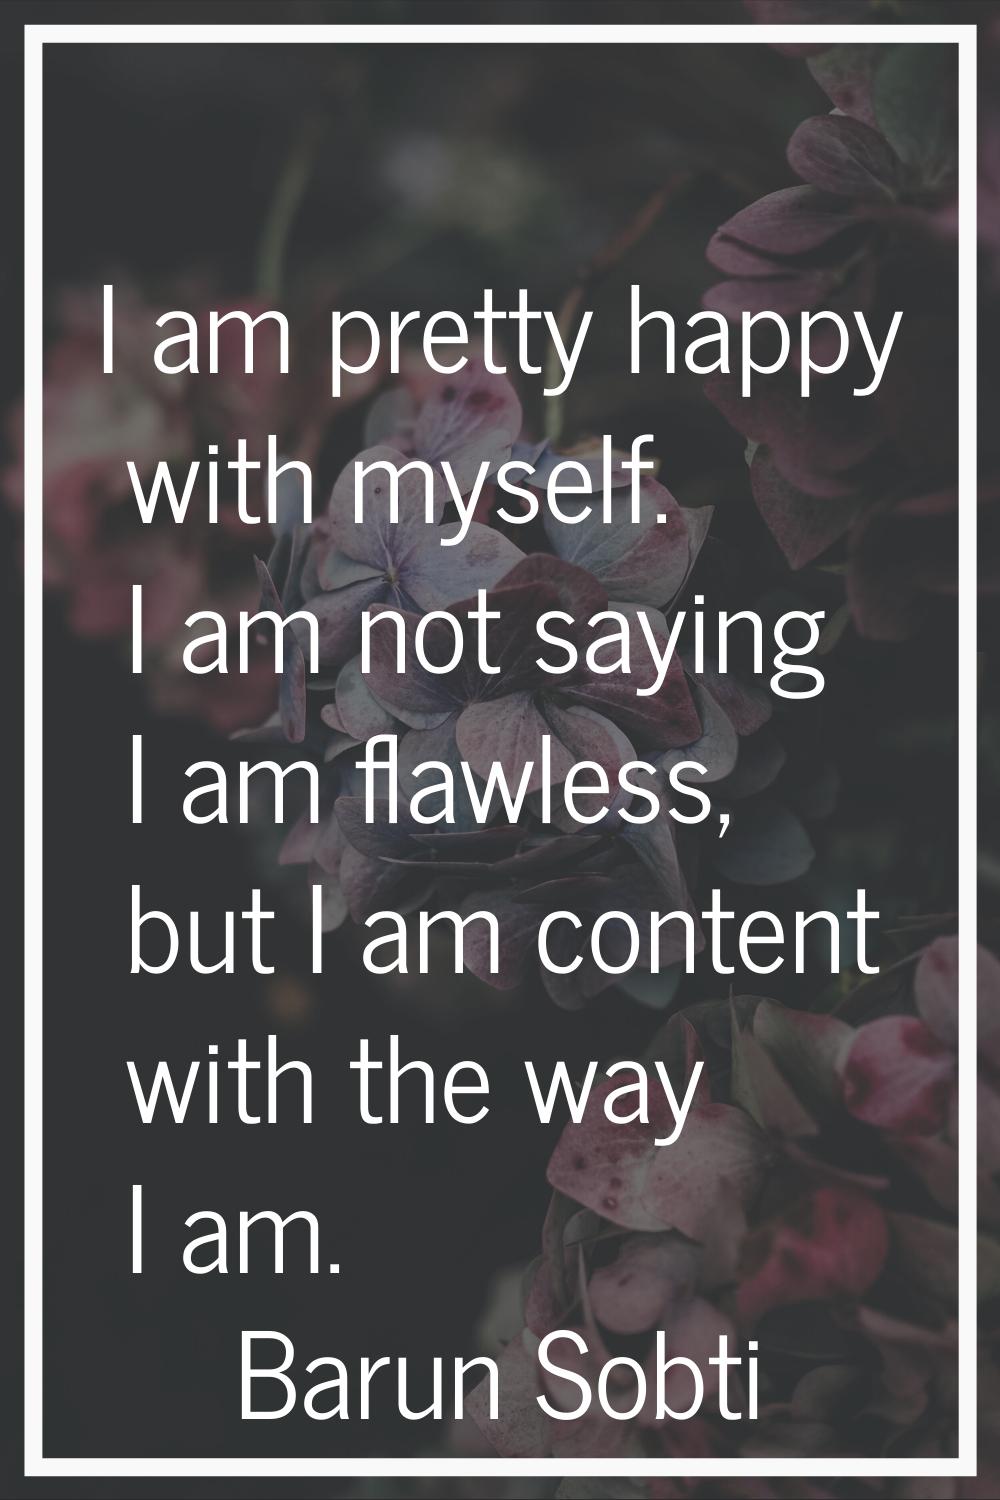 I am pretty happy with myself. I am not saying I am flawless, but I am content with the way I am.